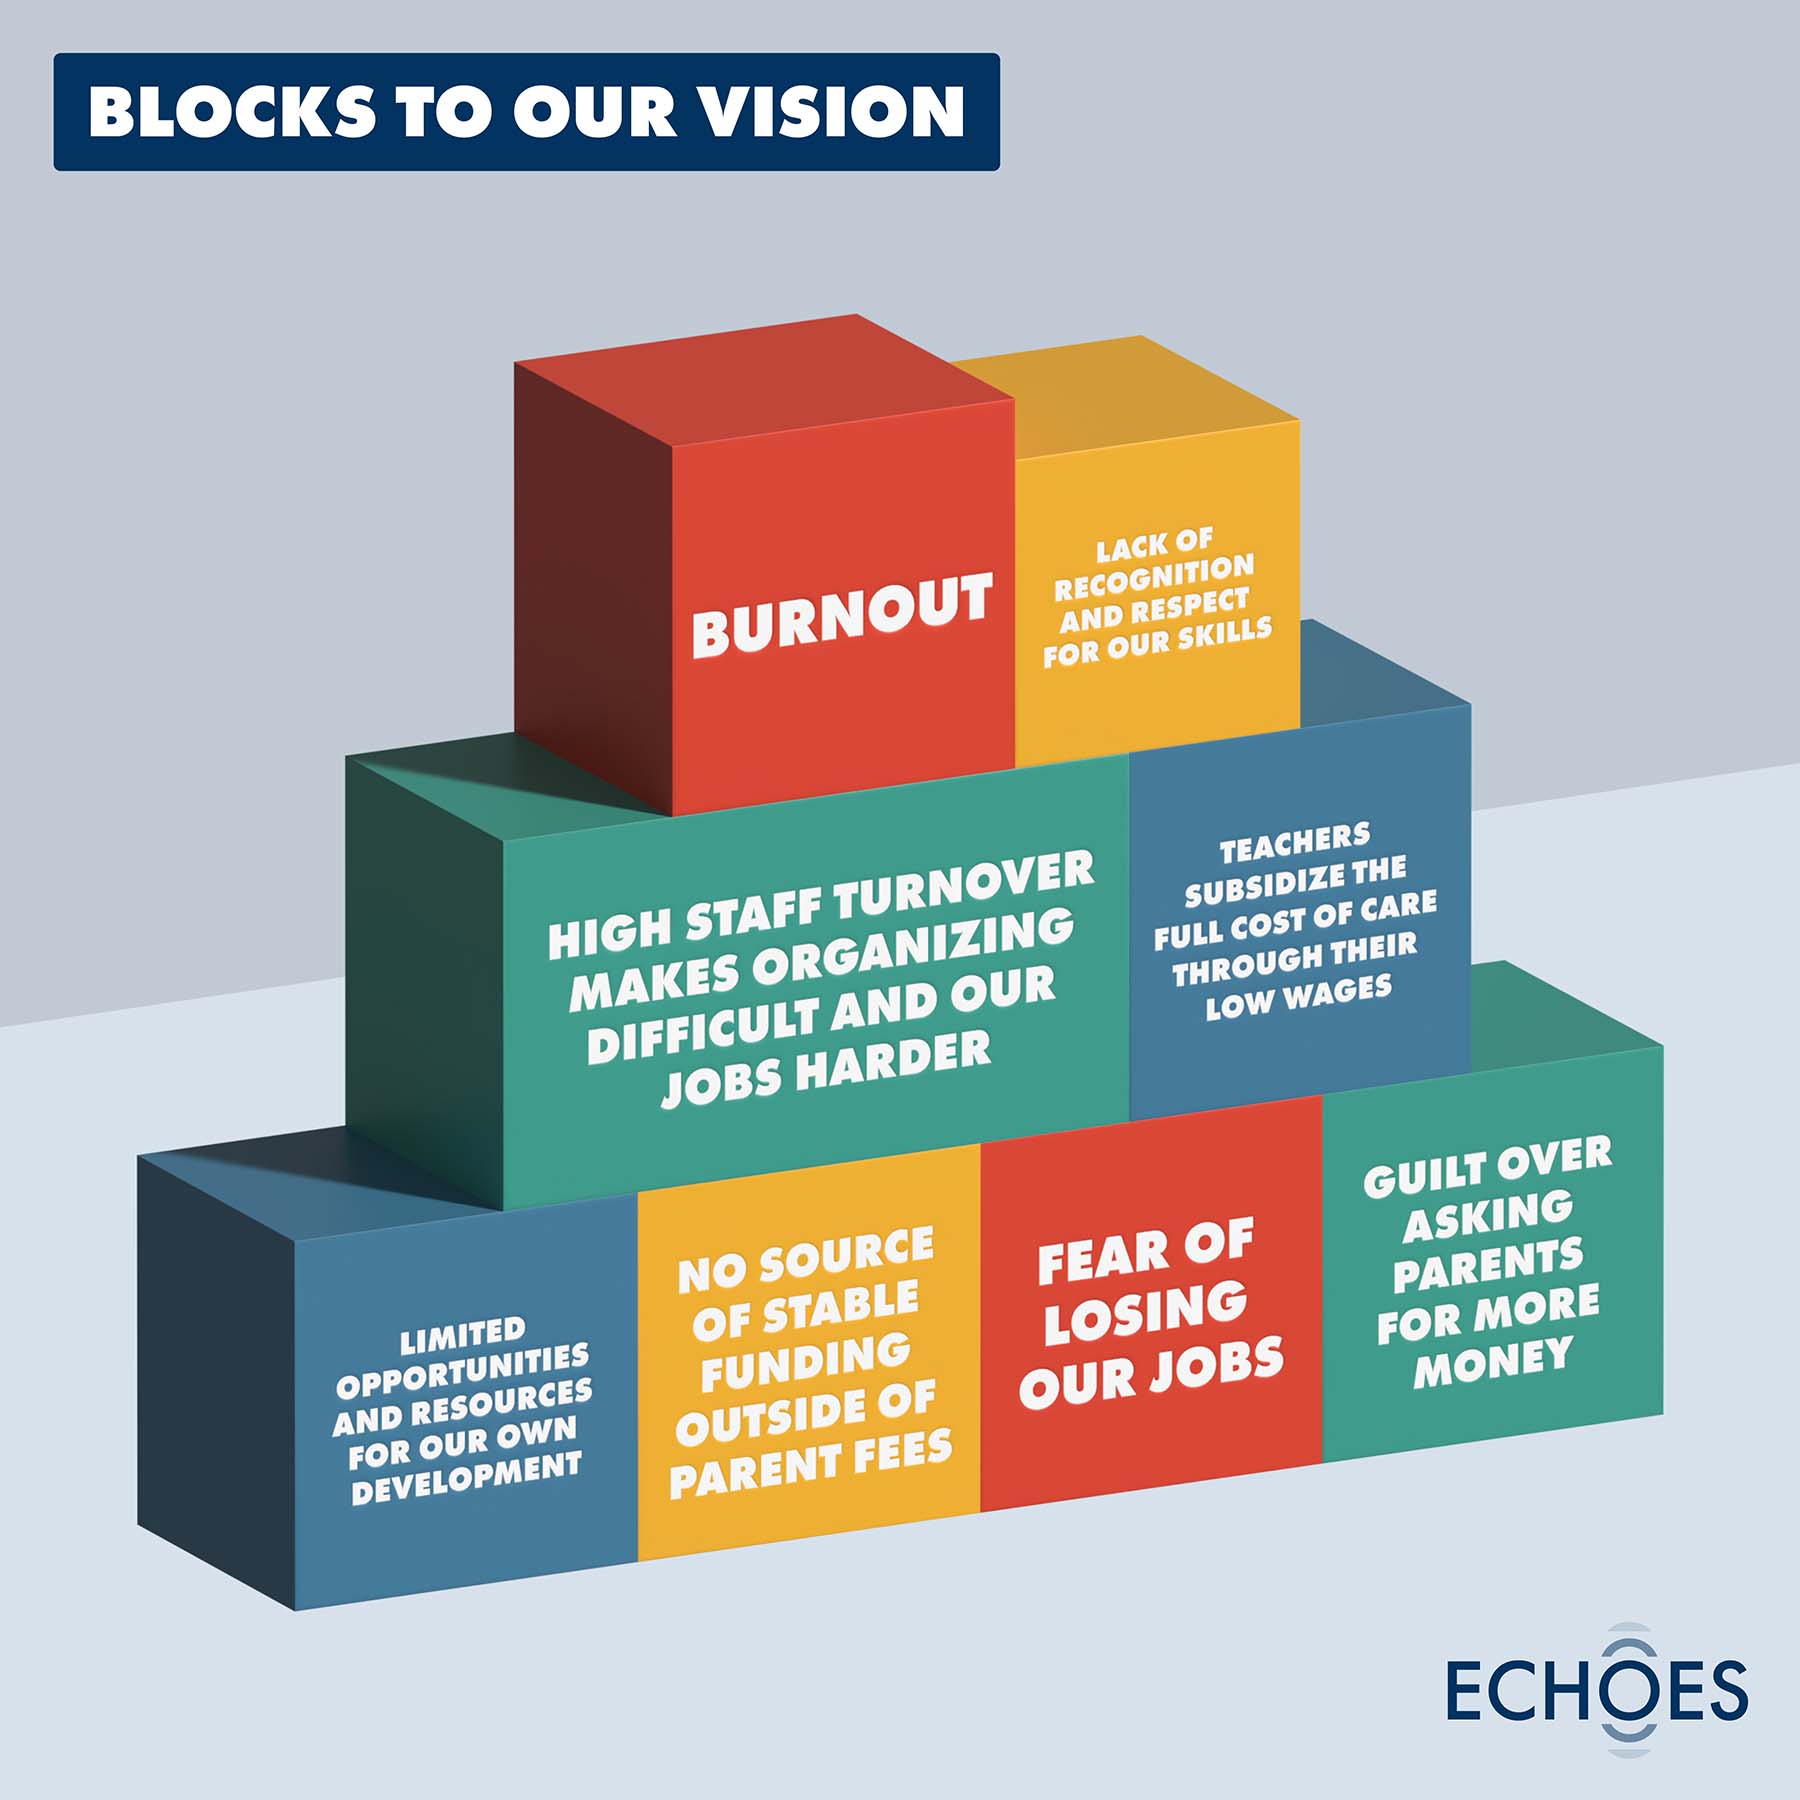 Echoes-block-to-our-vision@2x-100